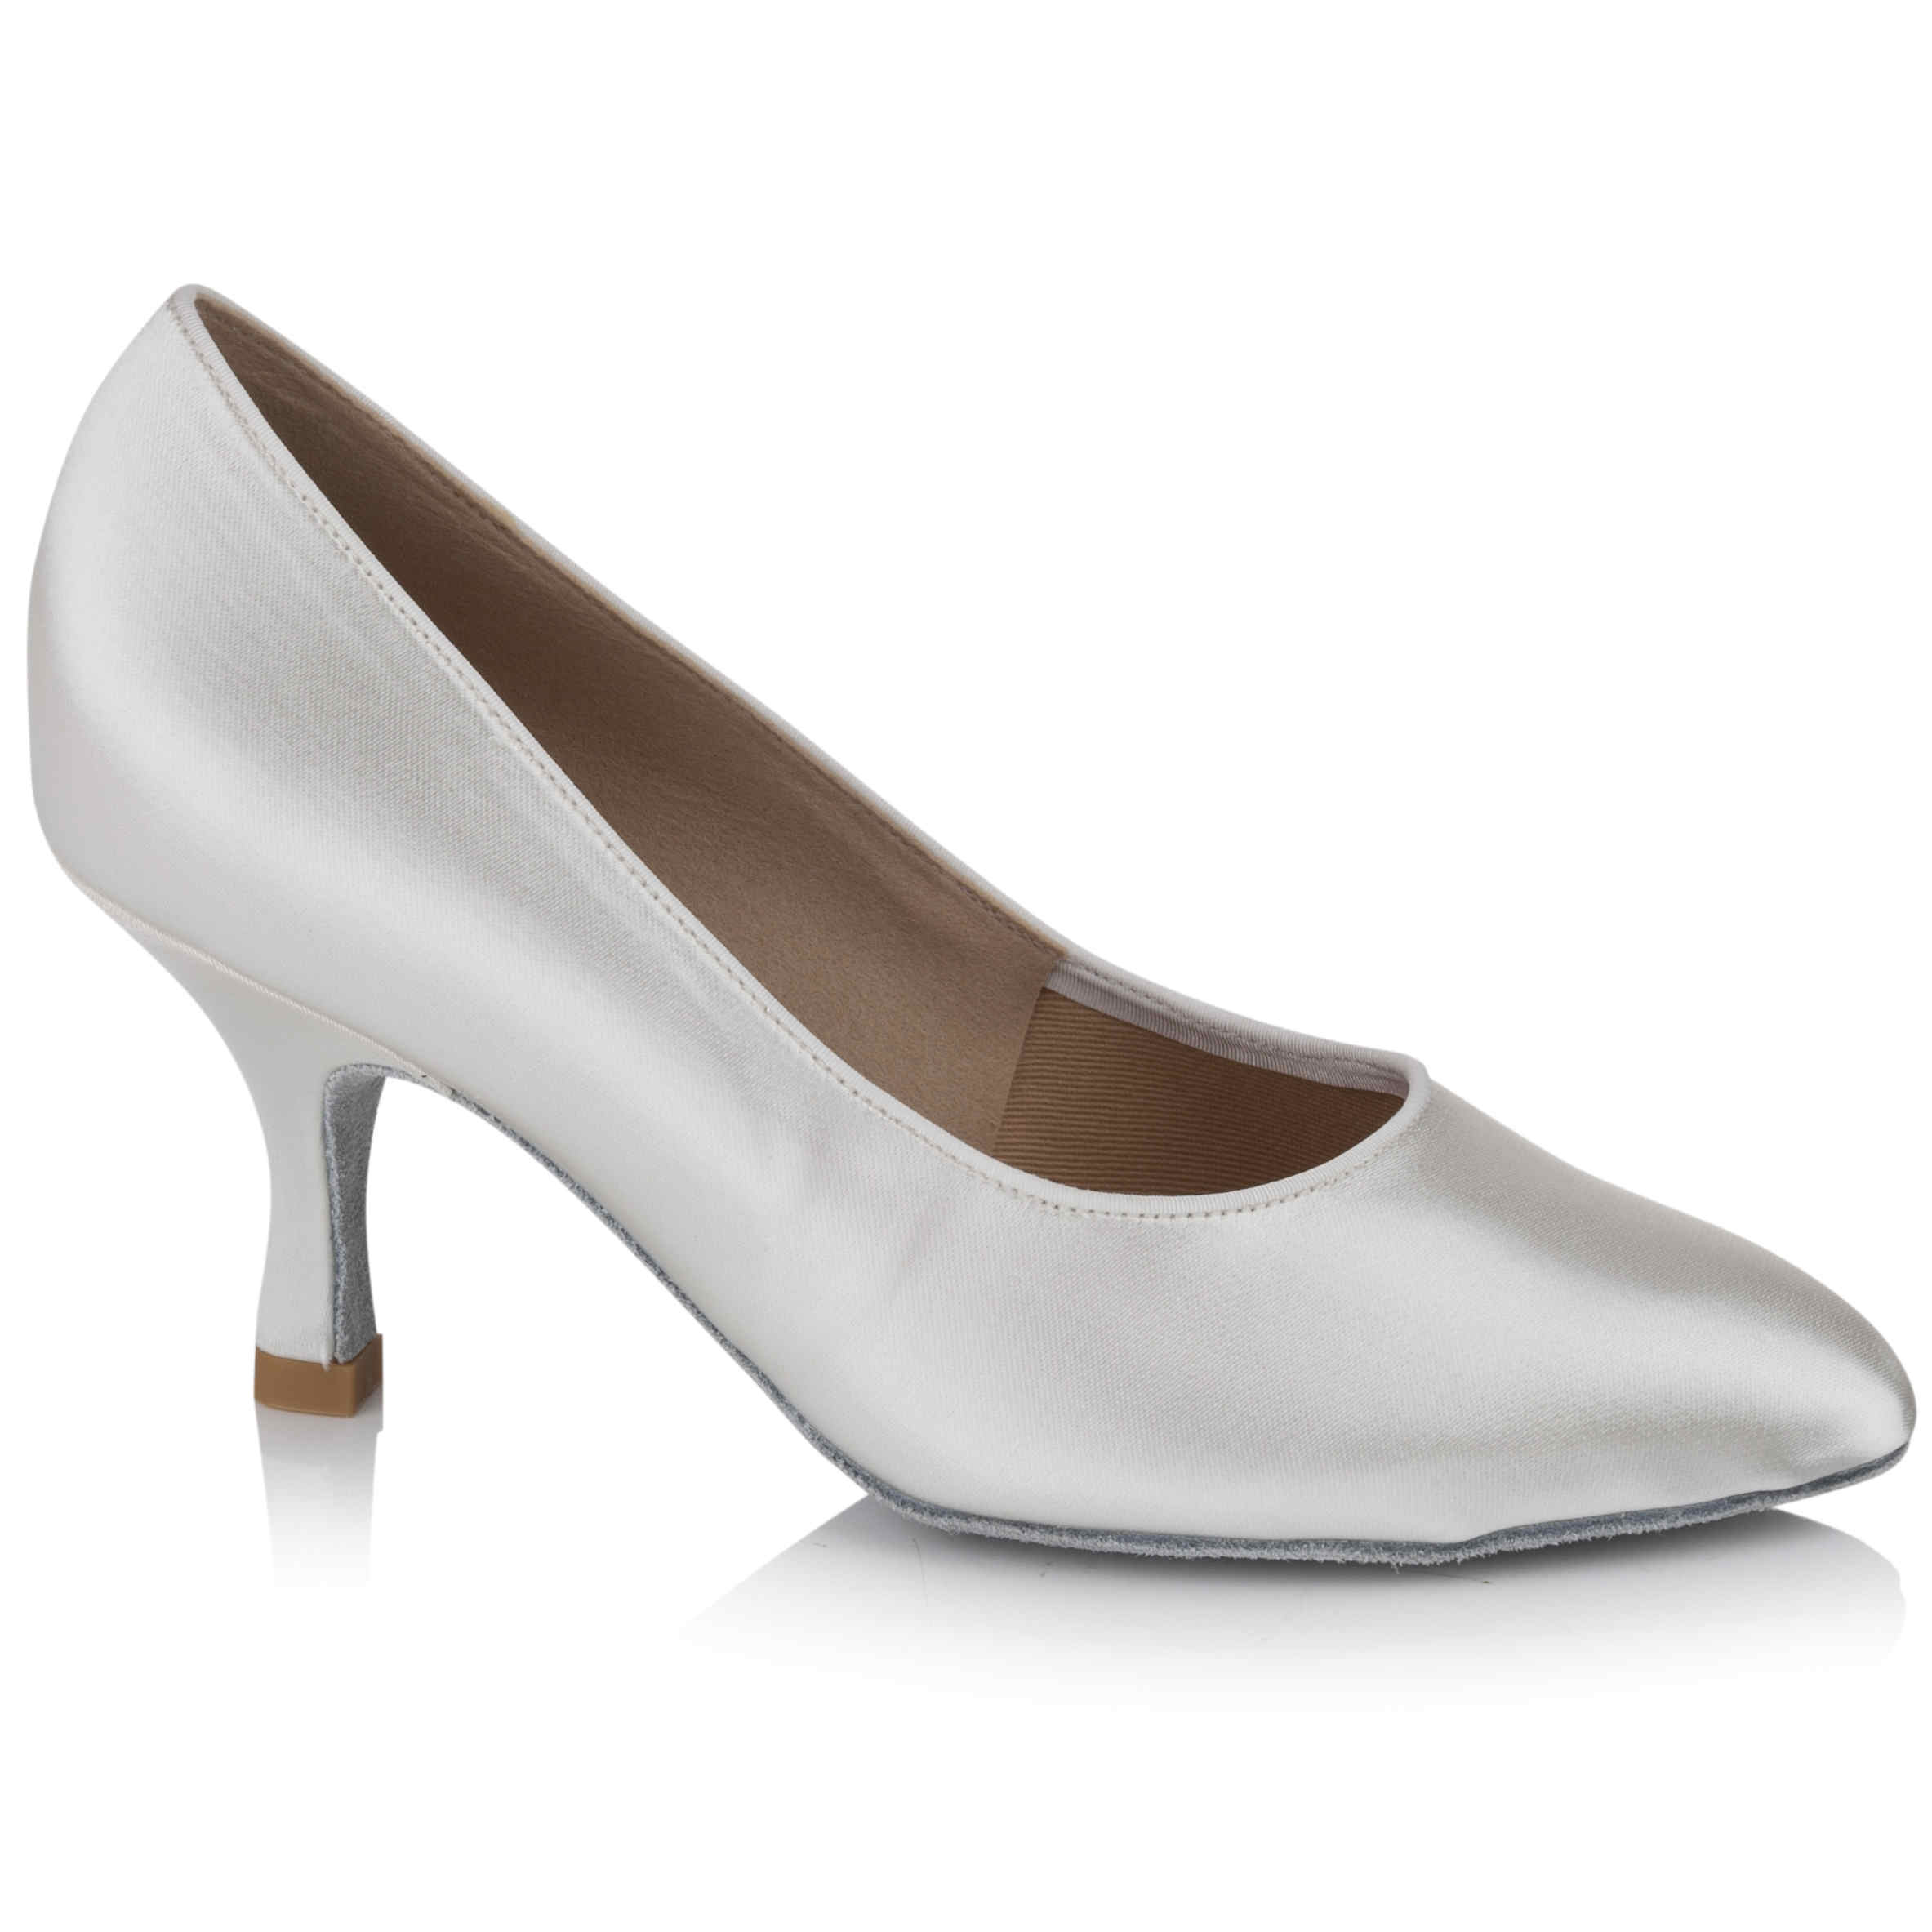 Freed Purity Ladies Whote Ballroom Court Dance Shoes | The Dancers Shop UK